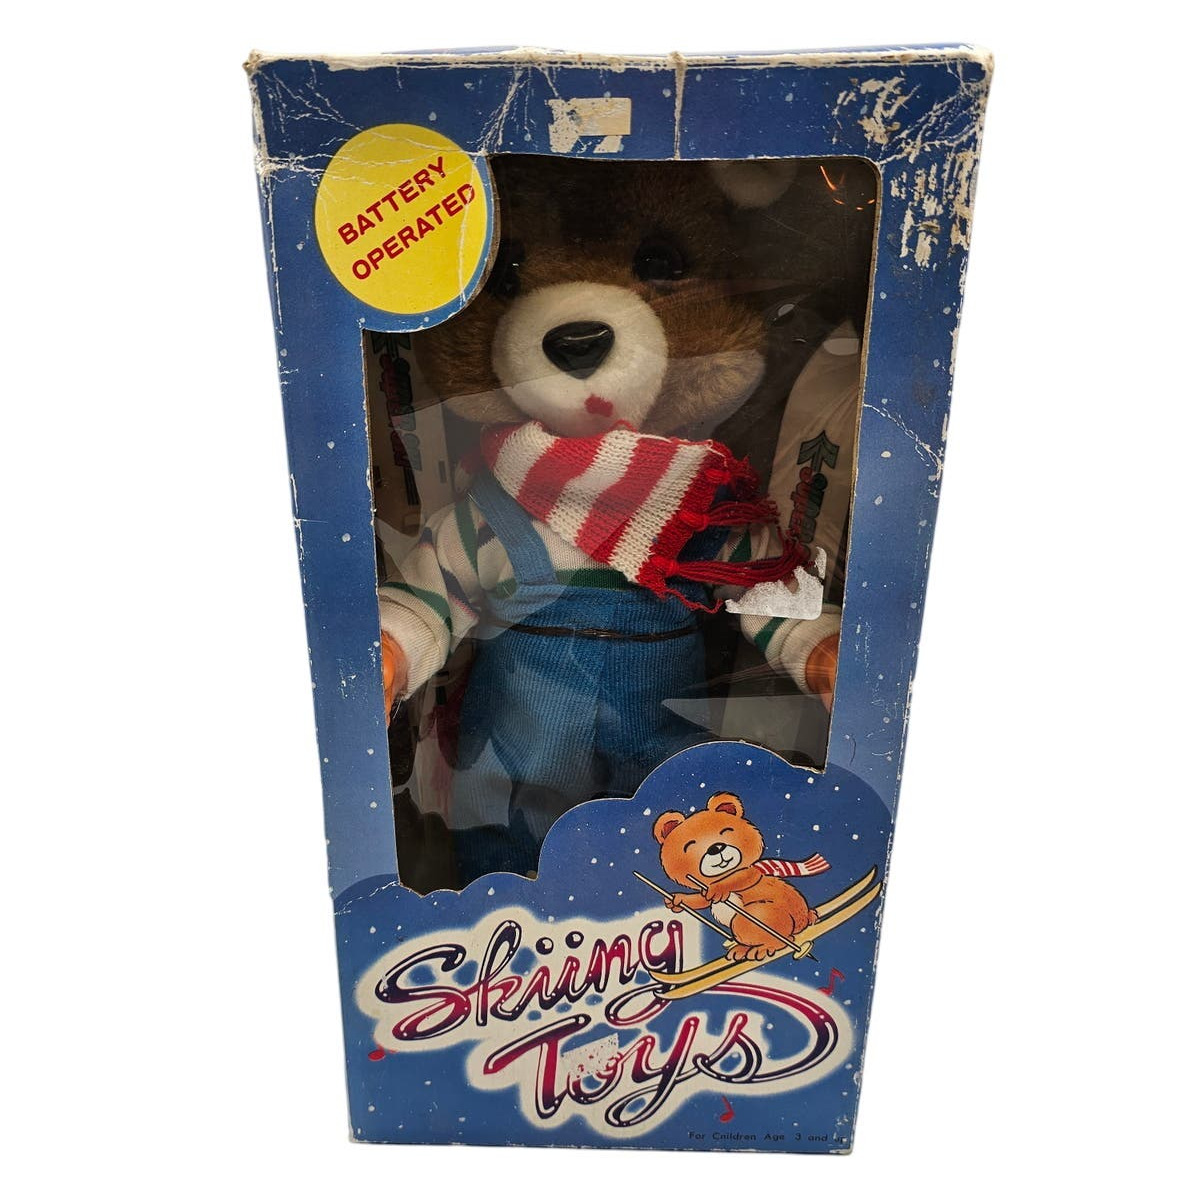 Vintage 1960s Skiing Plush Toys Teddy Bear Battery Operated Made In Japan